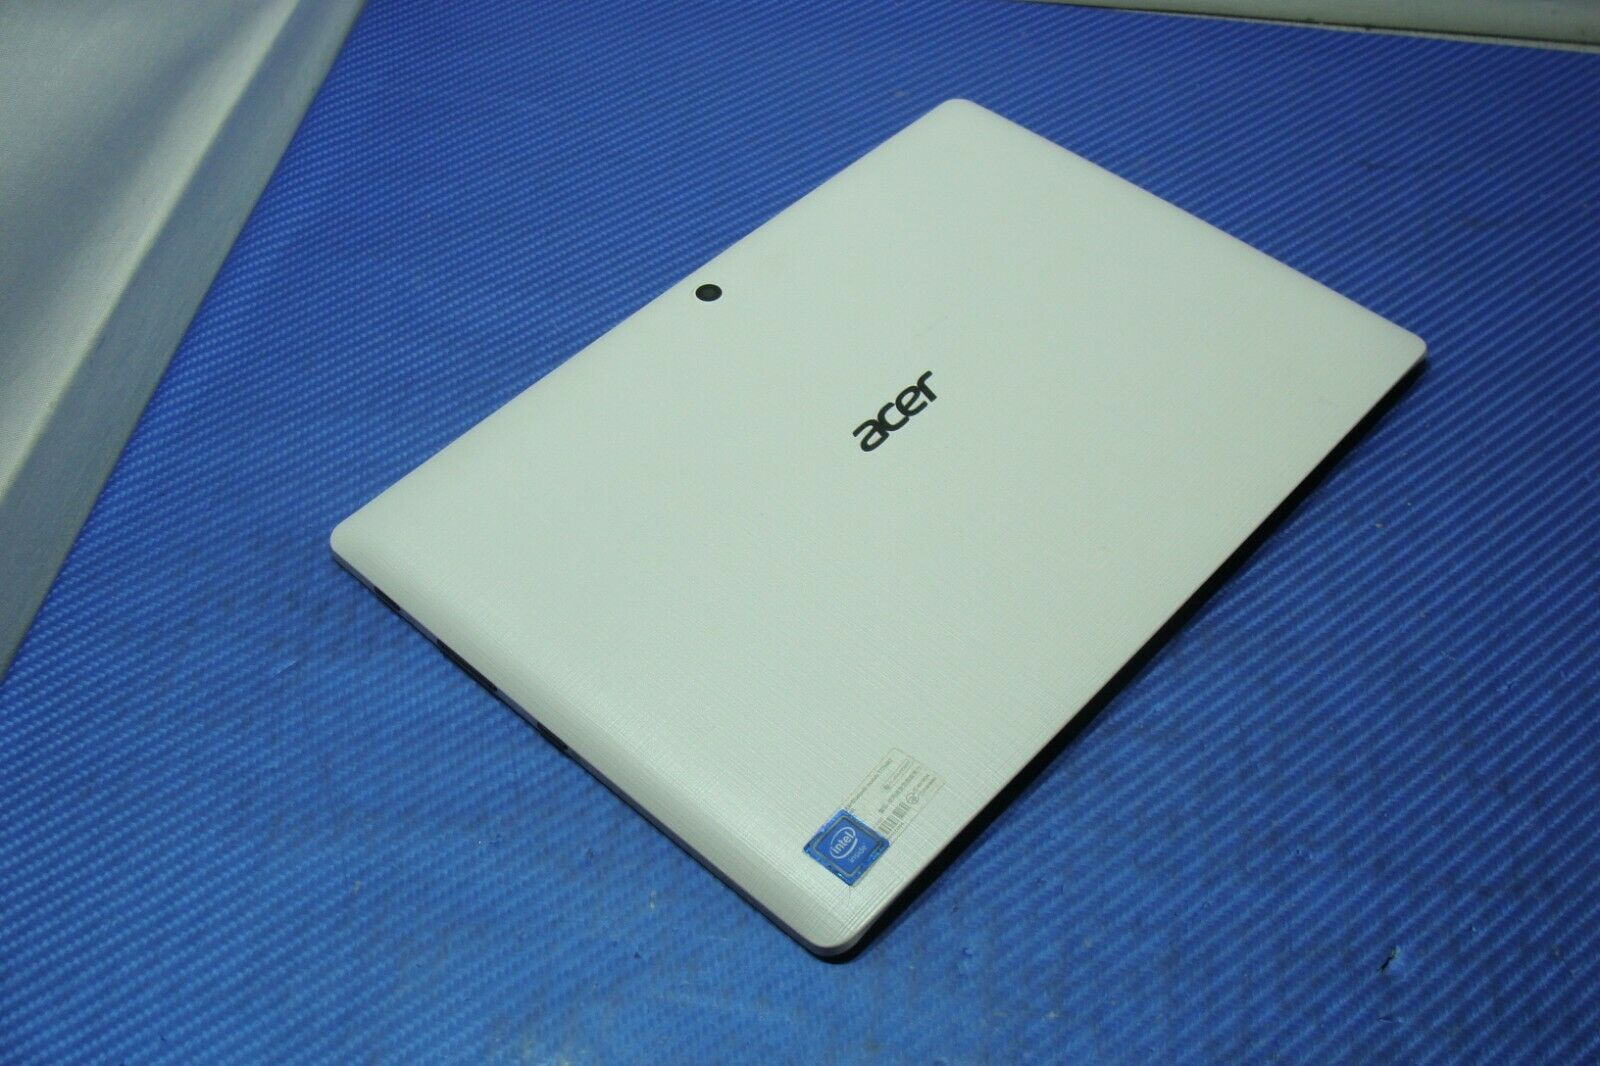 Acer Aspire Switch 10.1